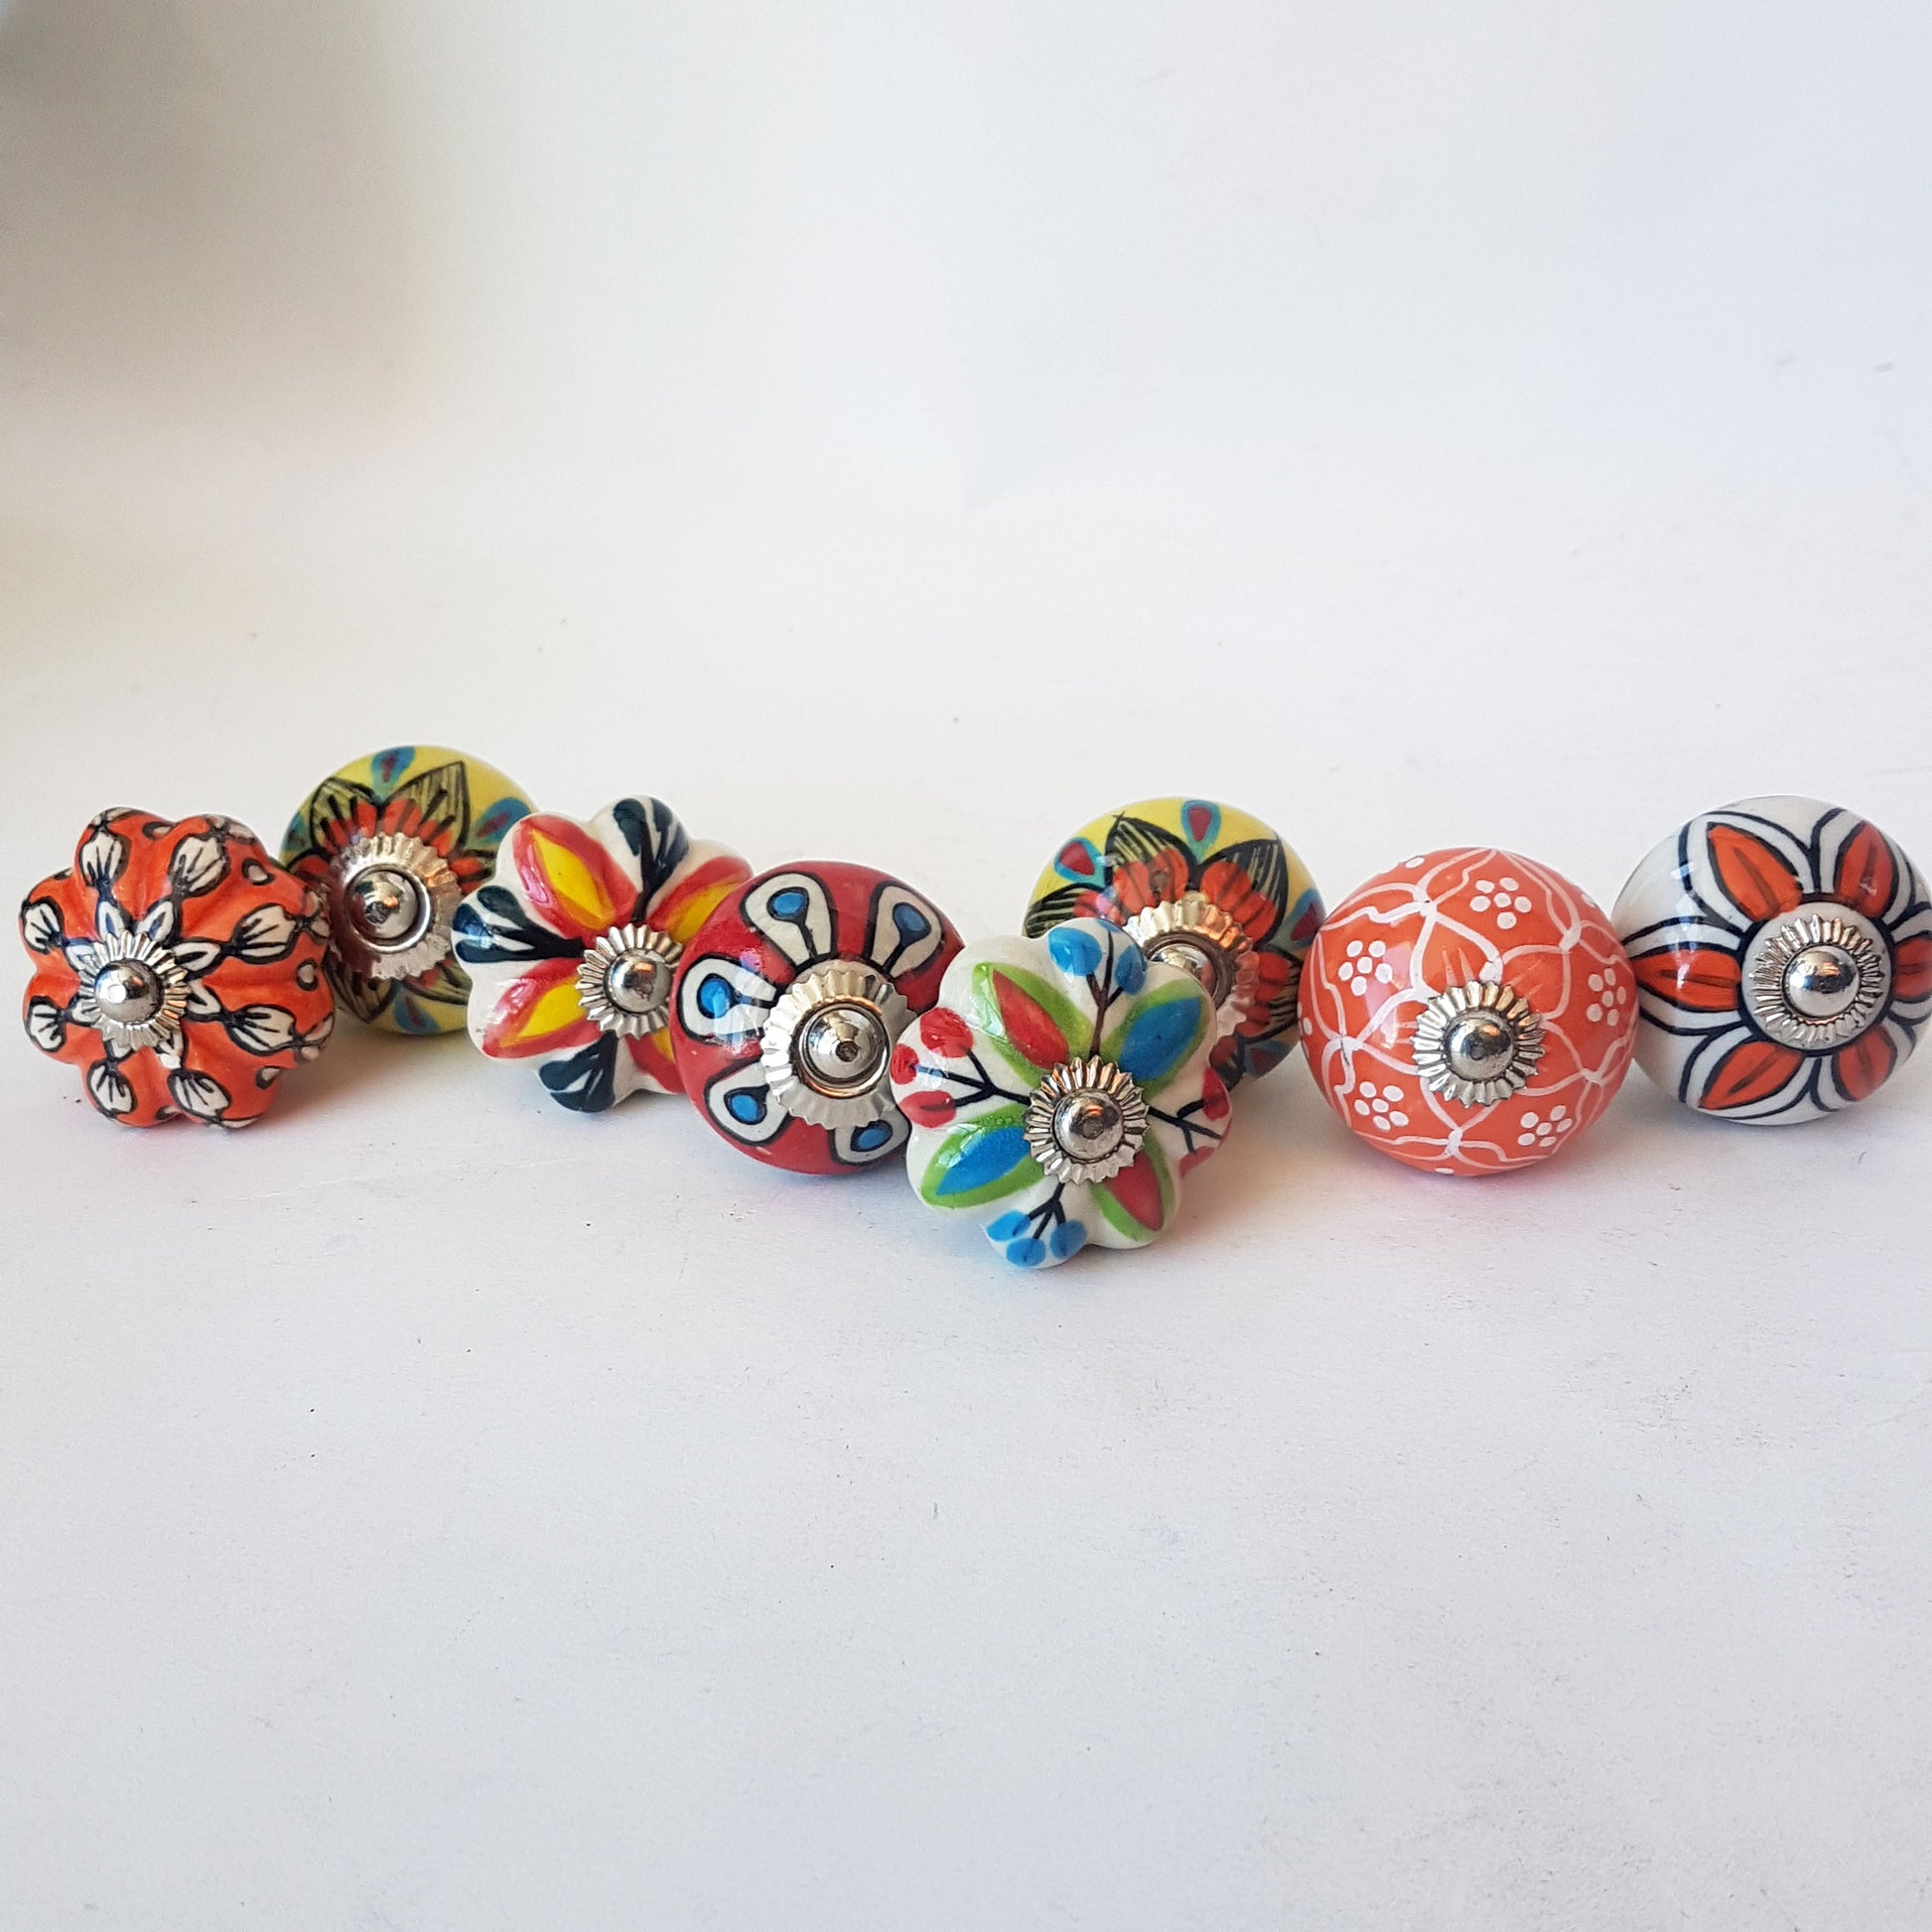 Tropicale collection of 8 designer hand painted knob pulls for cabinets and cupboards, dresser drawers.  Exclusive vibrant floral designs. - Vintage India Ca